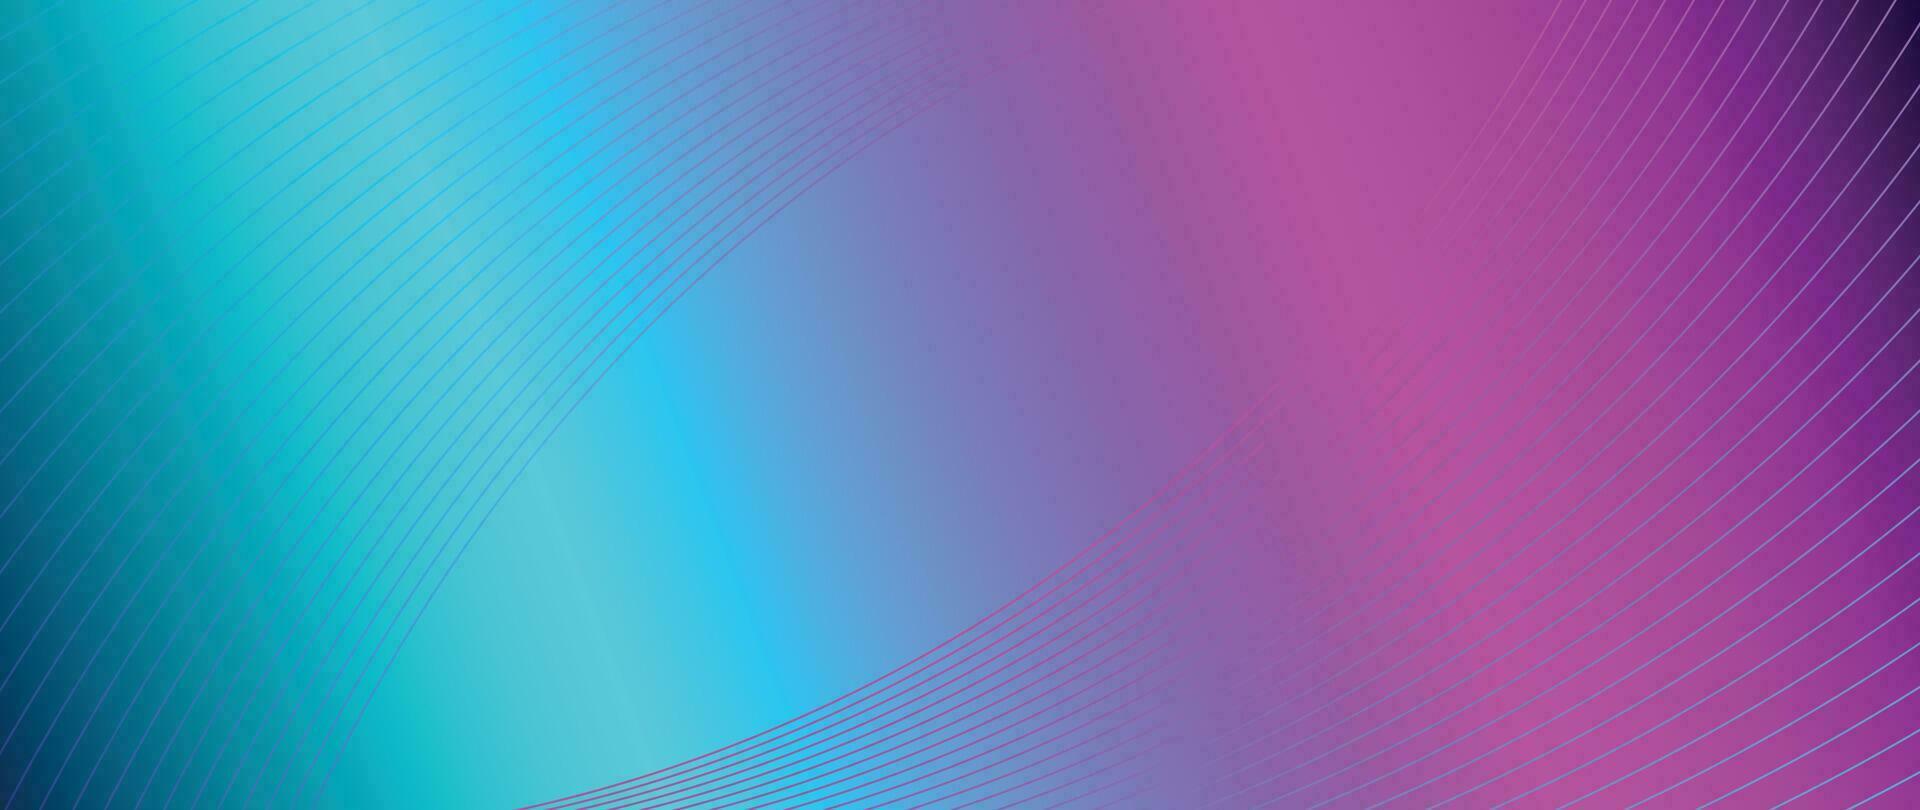 Abstract vibrant gradient line background vector. Futuristic style wallpaper with line distortion, wave, curved lines, colorful. Modern wallpaper design for backdrop, website, business, technology. vector